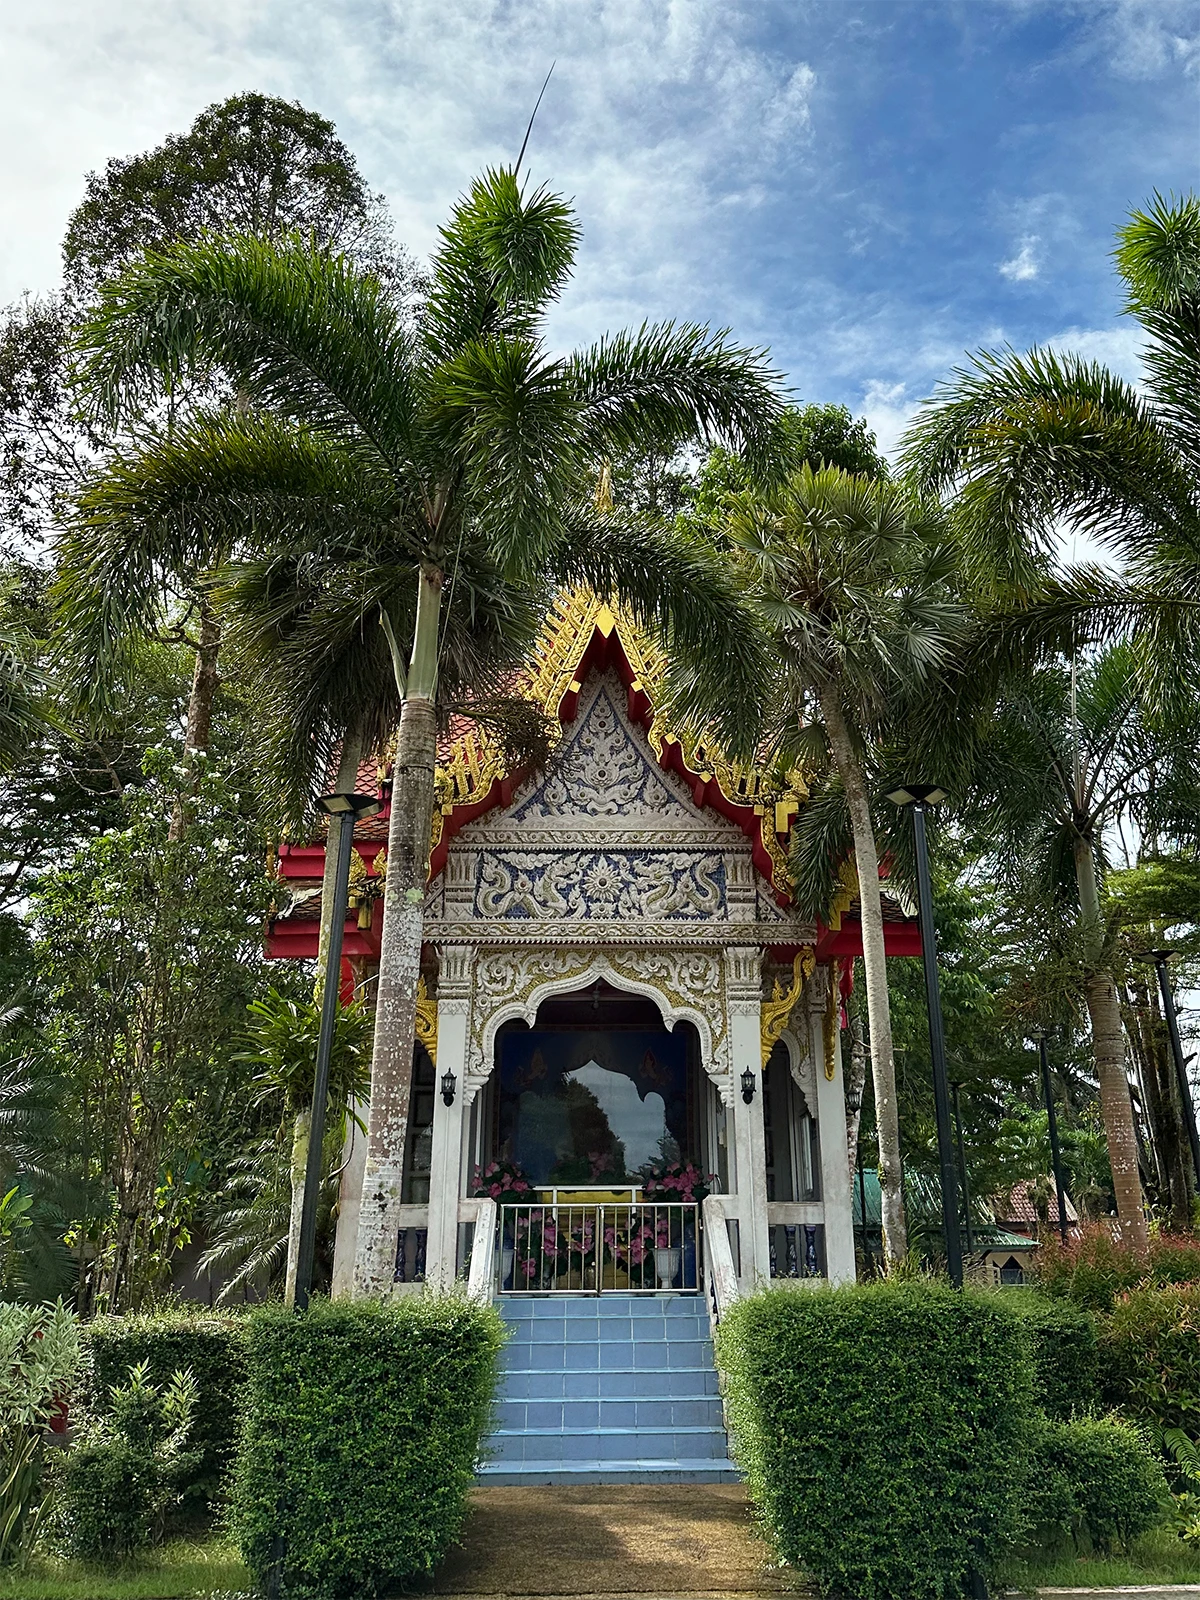 khao lak thailand view of temple in palm trees